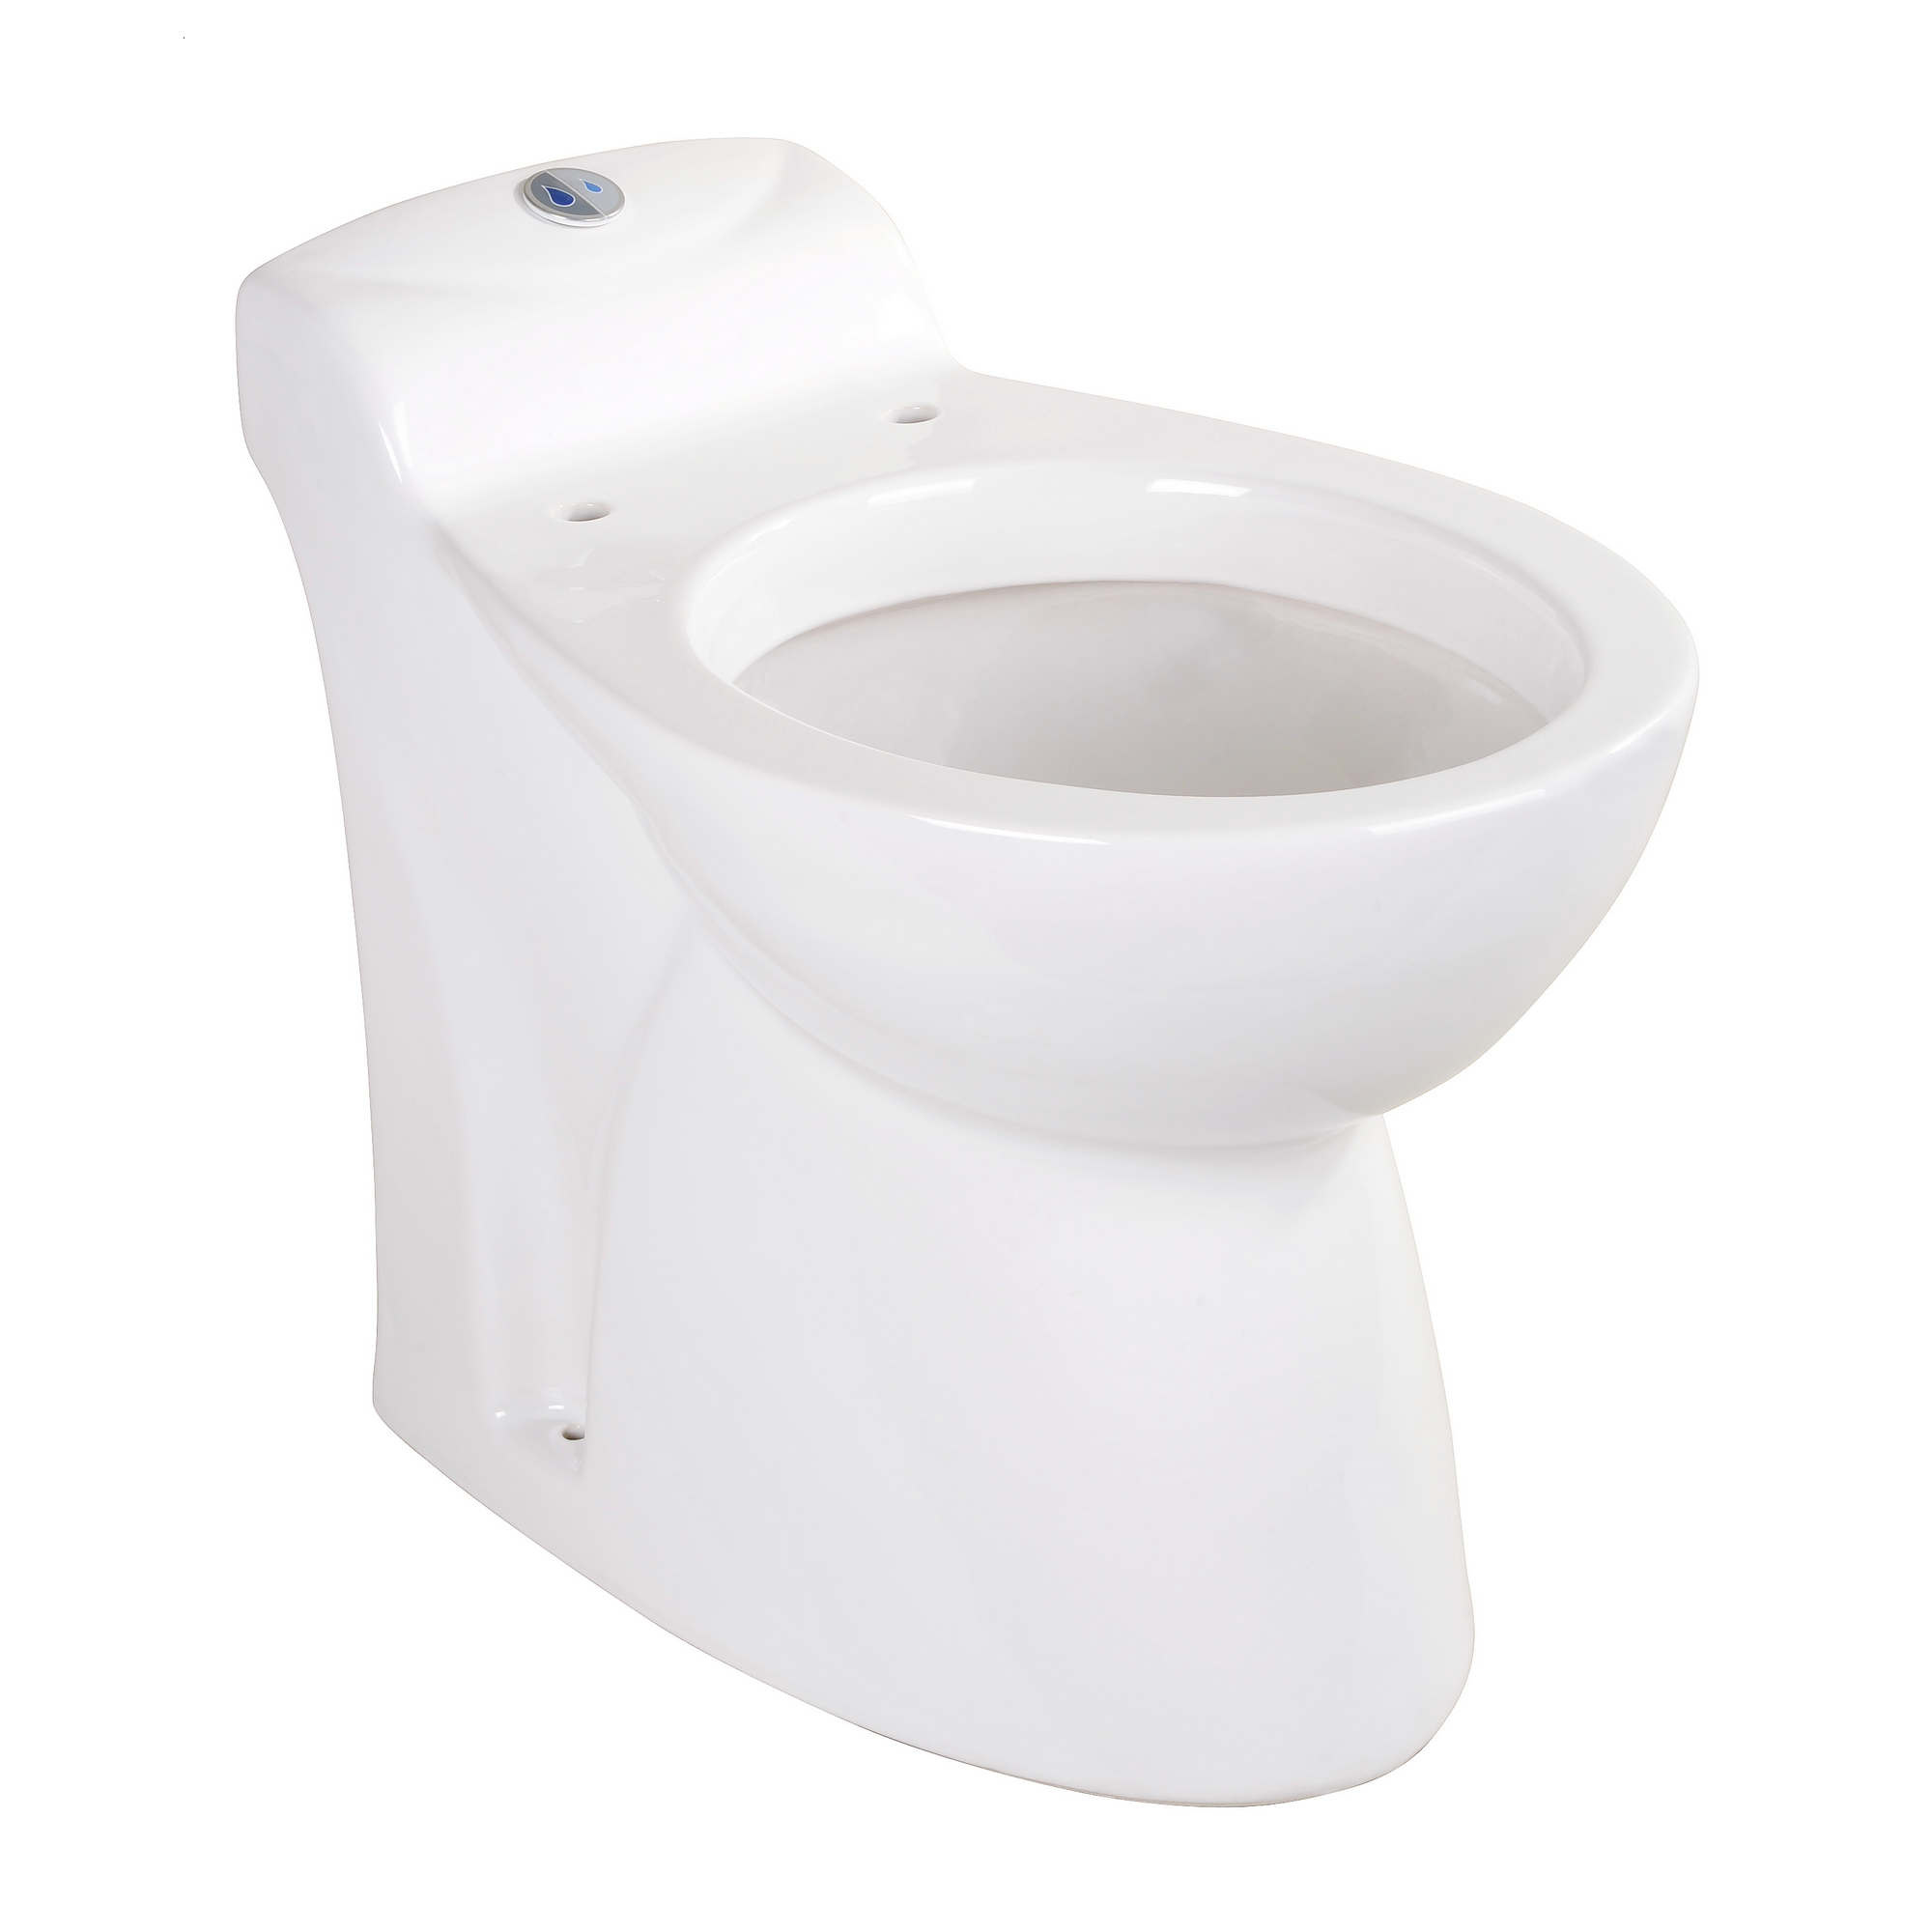 Stand-WC 'Compact WC S1' mit integrierter Hebeanlage + product picture